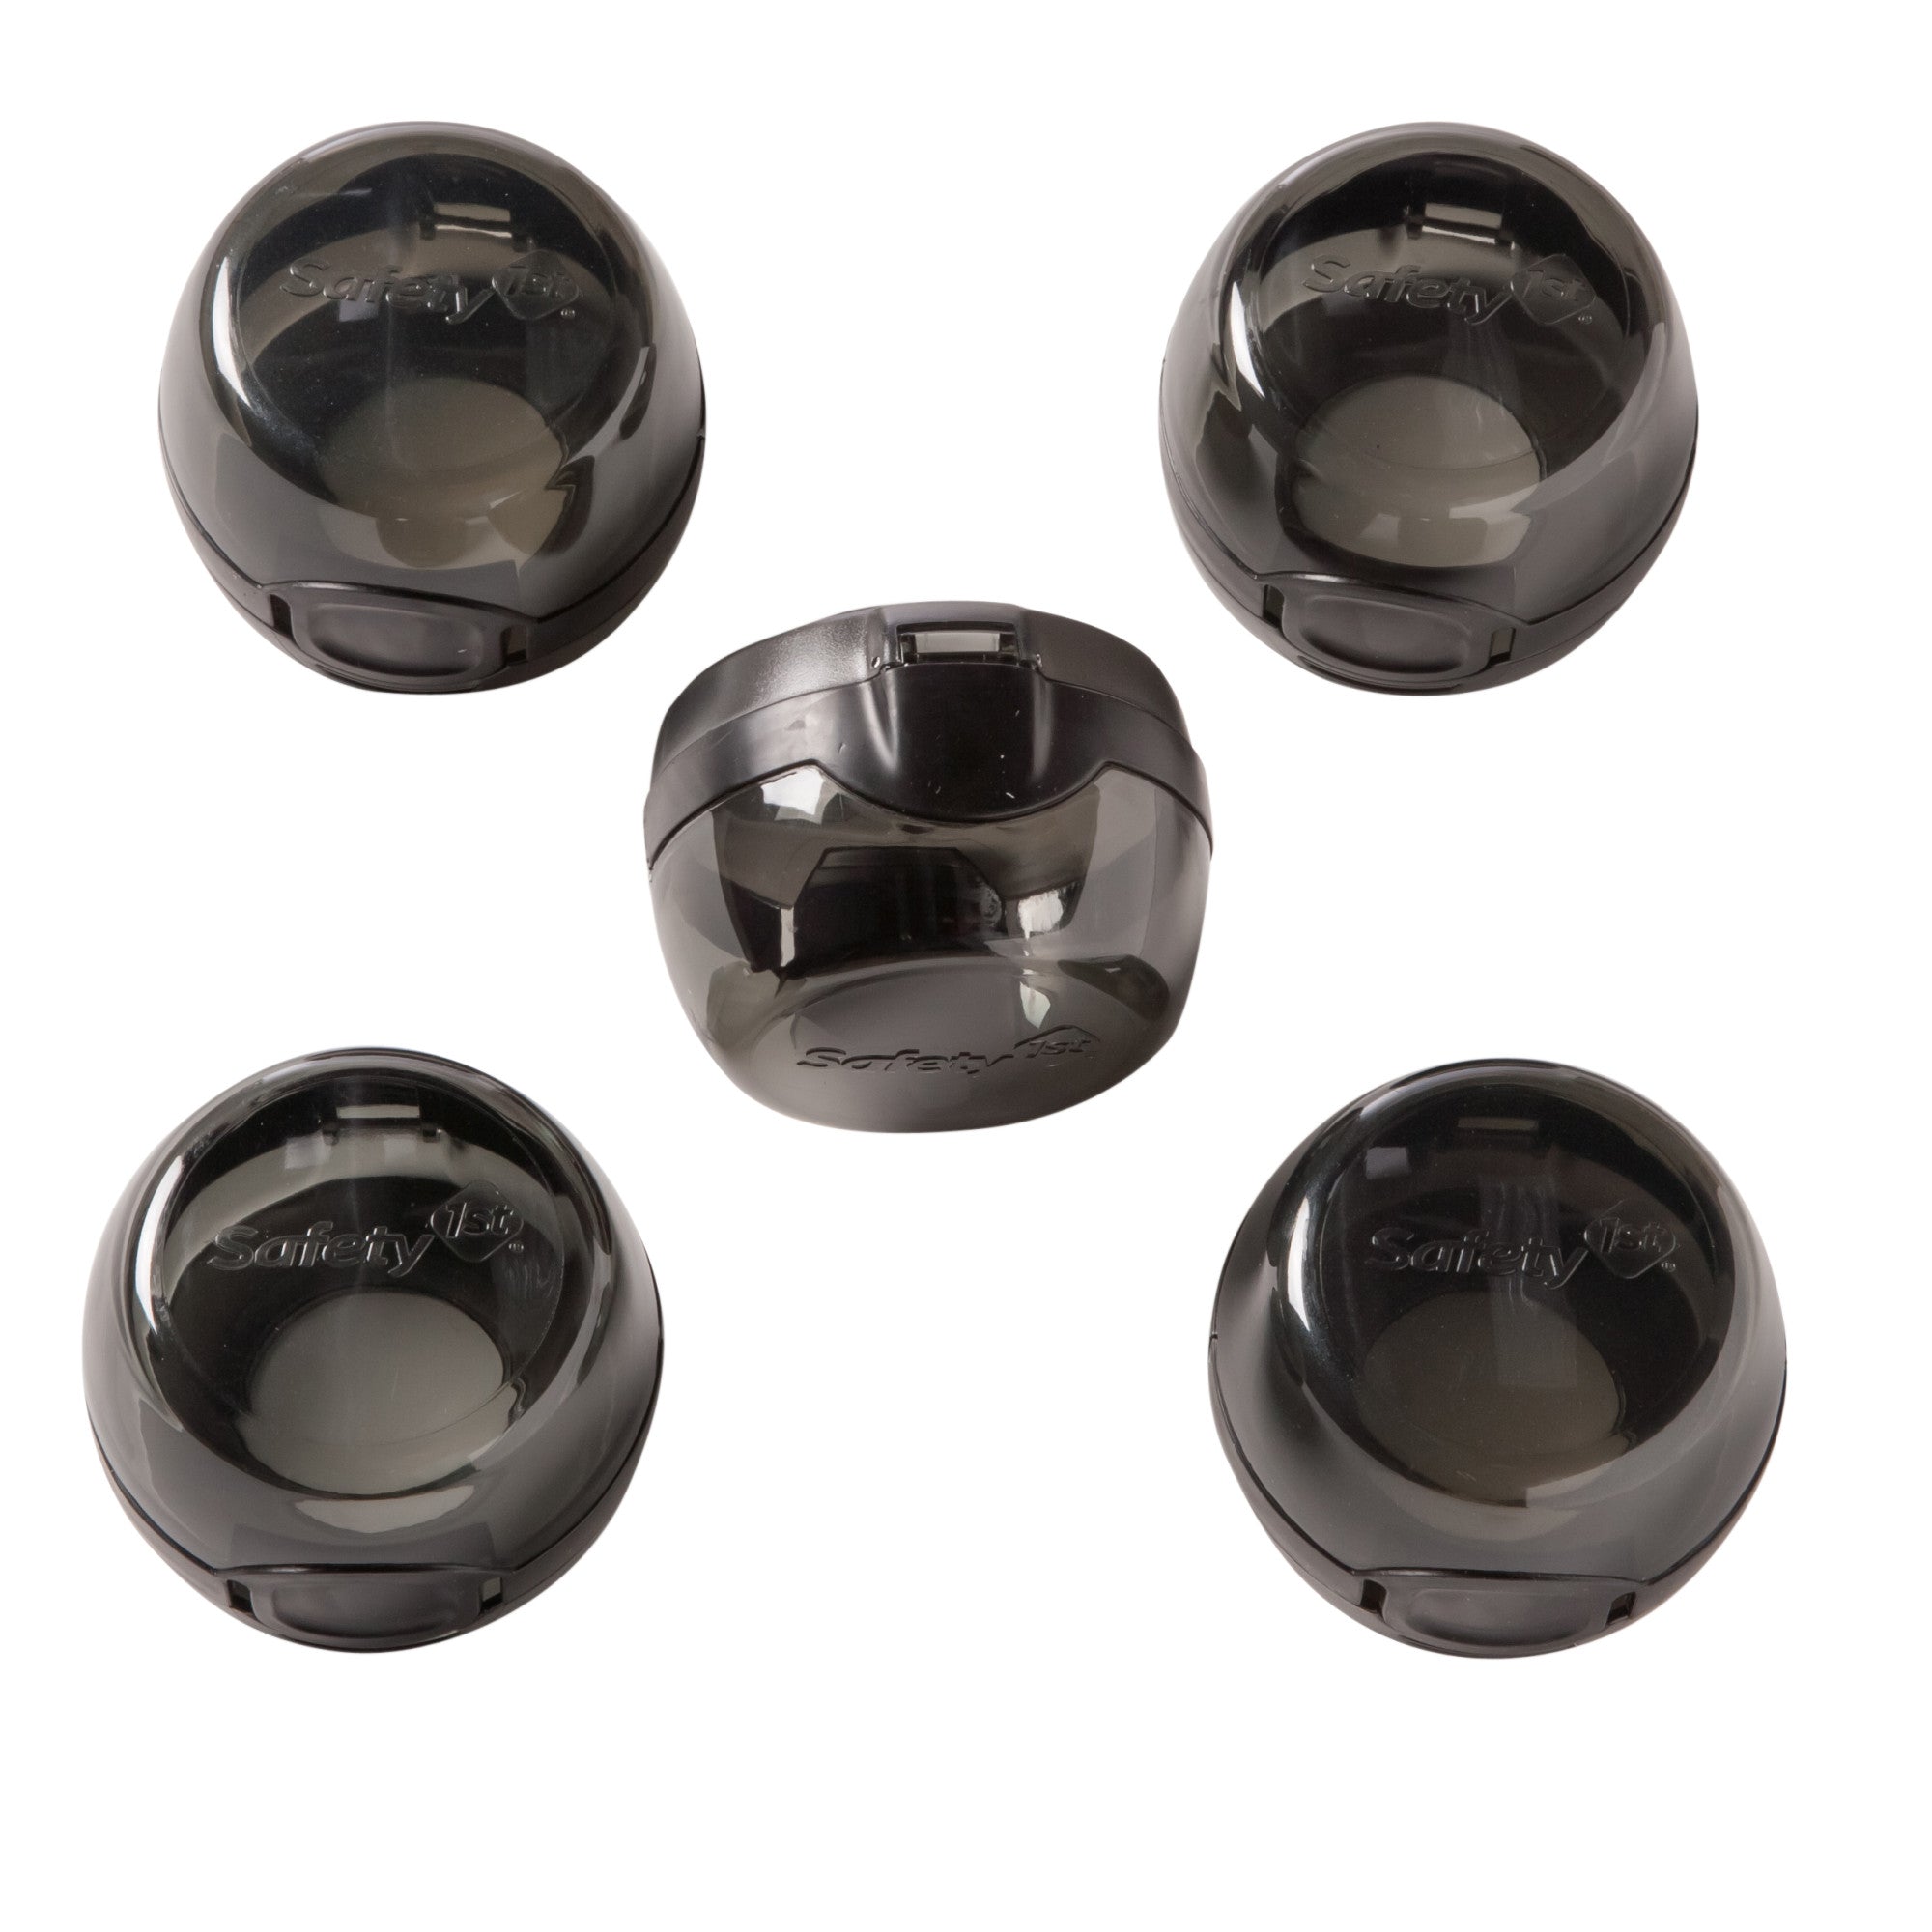 Safety 1st Stove Knob Covers in Black